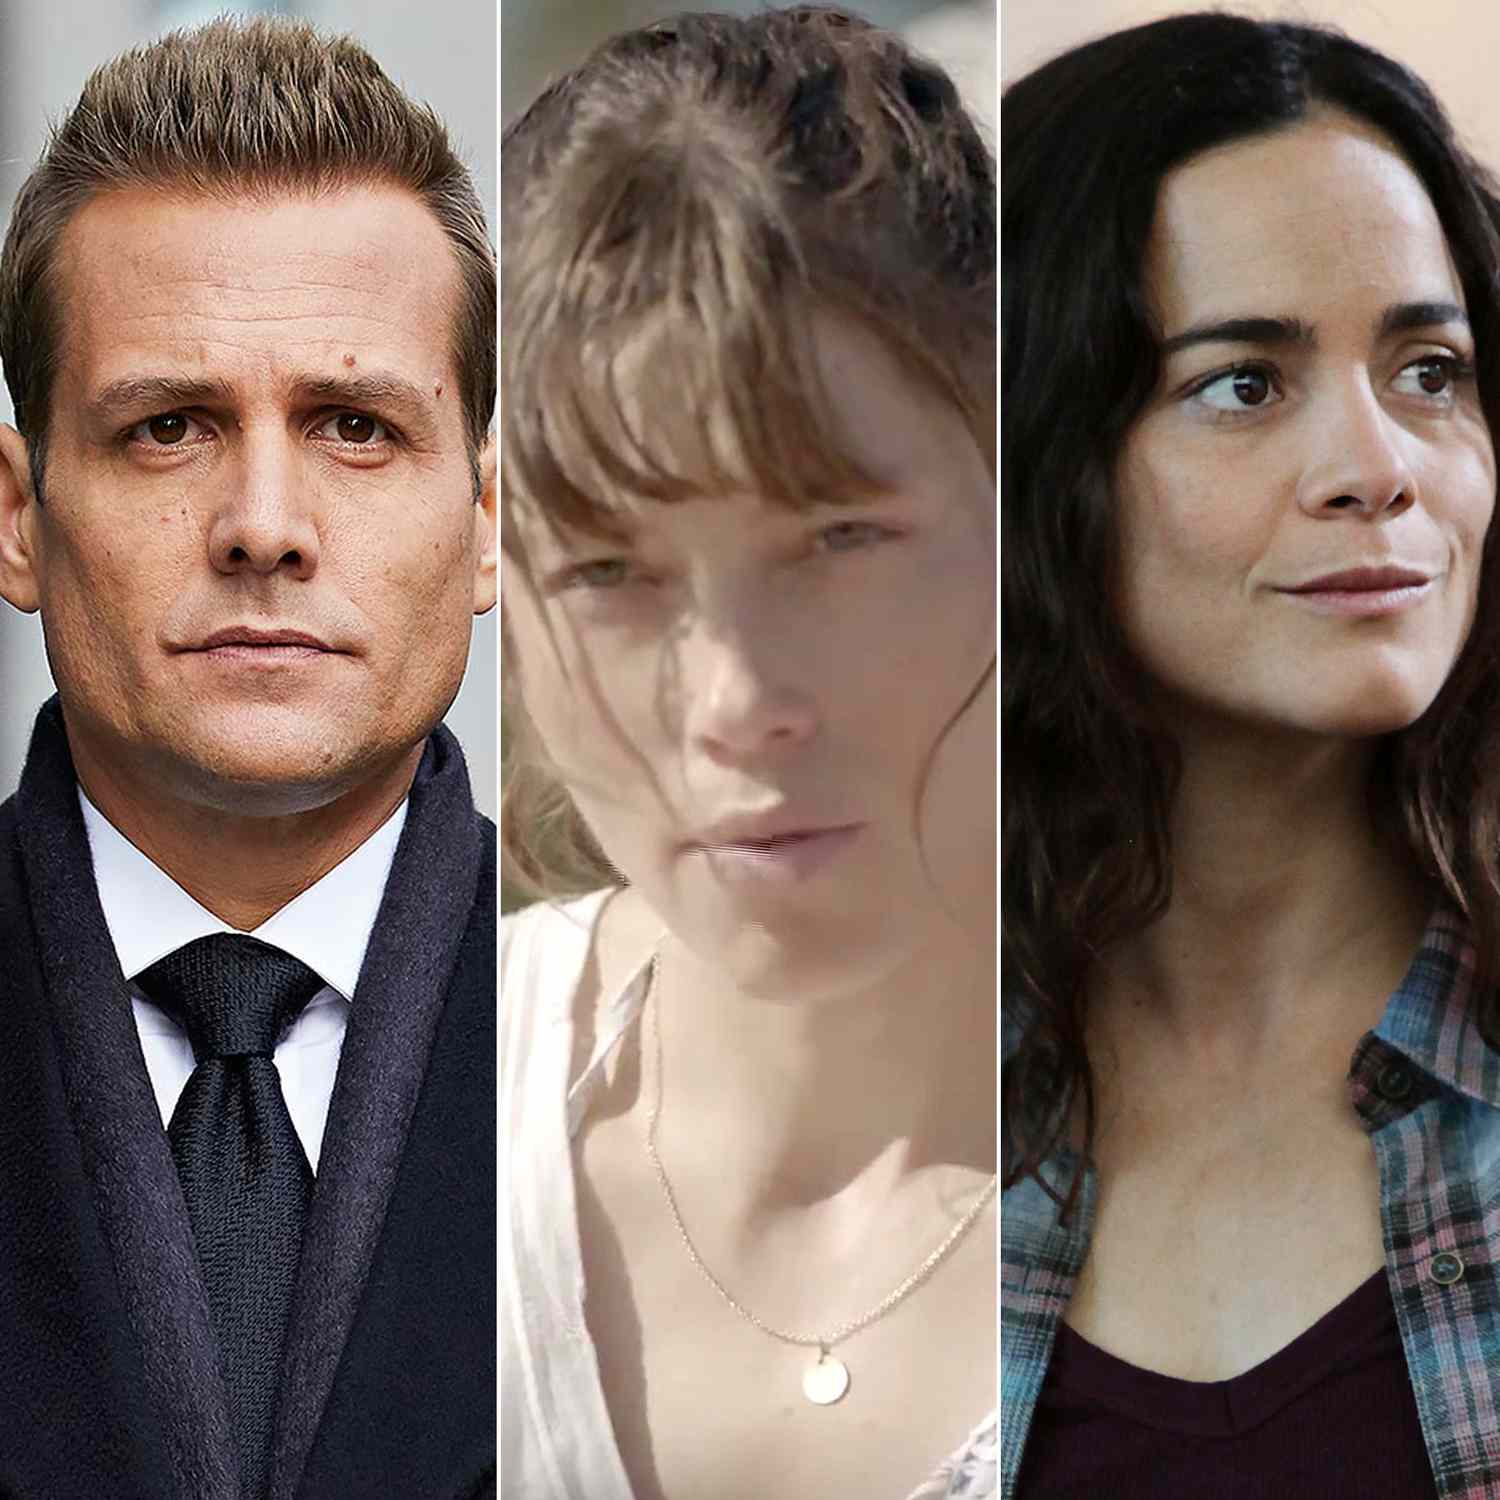 Suits, The Sinner and Queen of the South